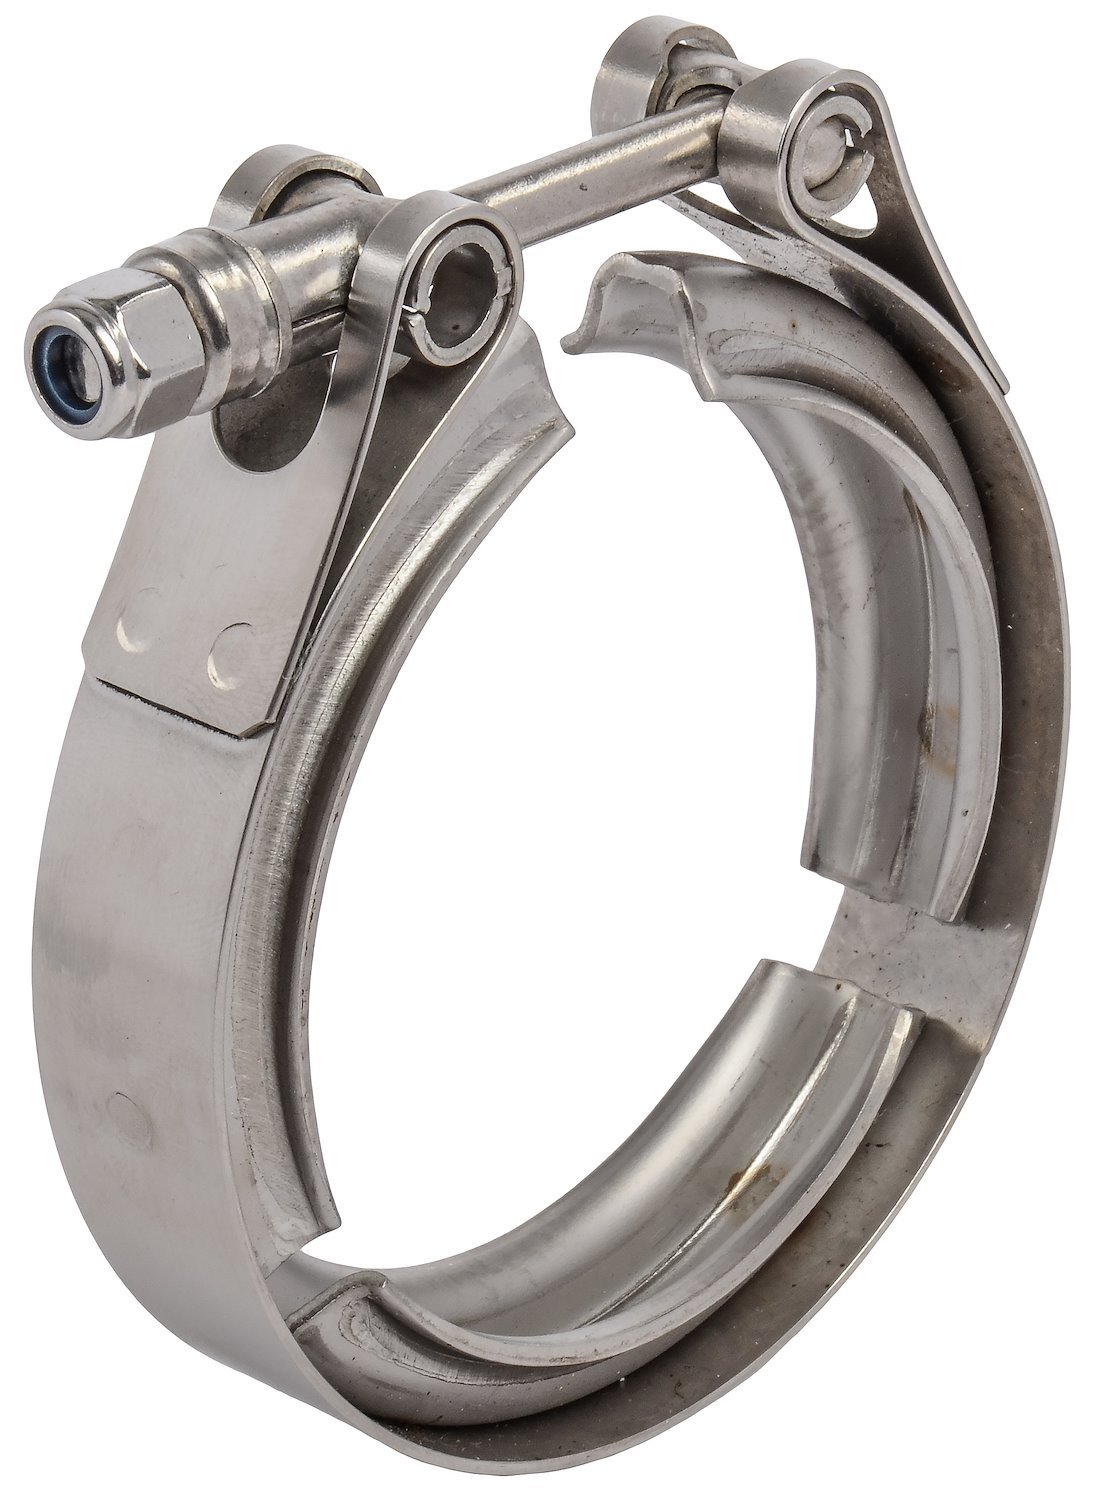 Stainless Steel Standard V-Band Clamp 2.500 in.